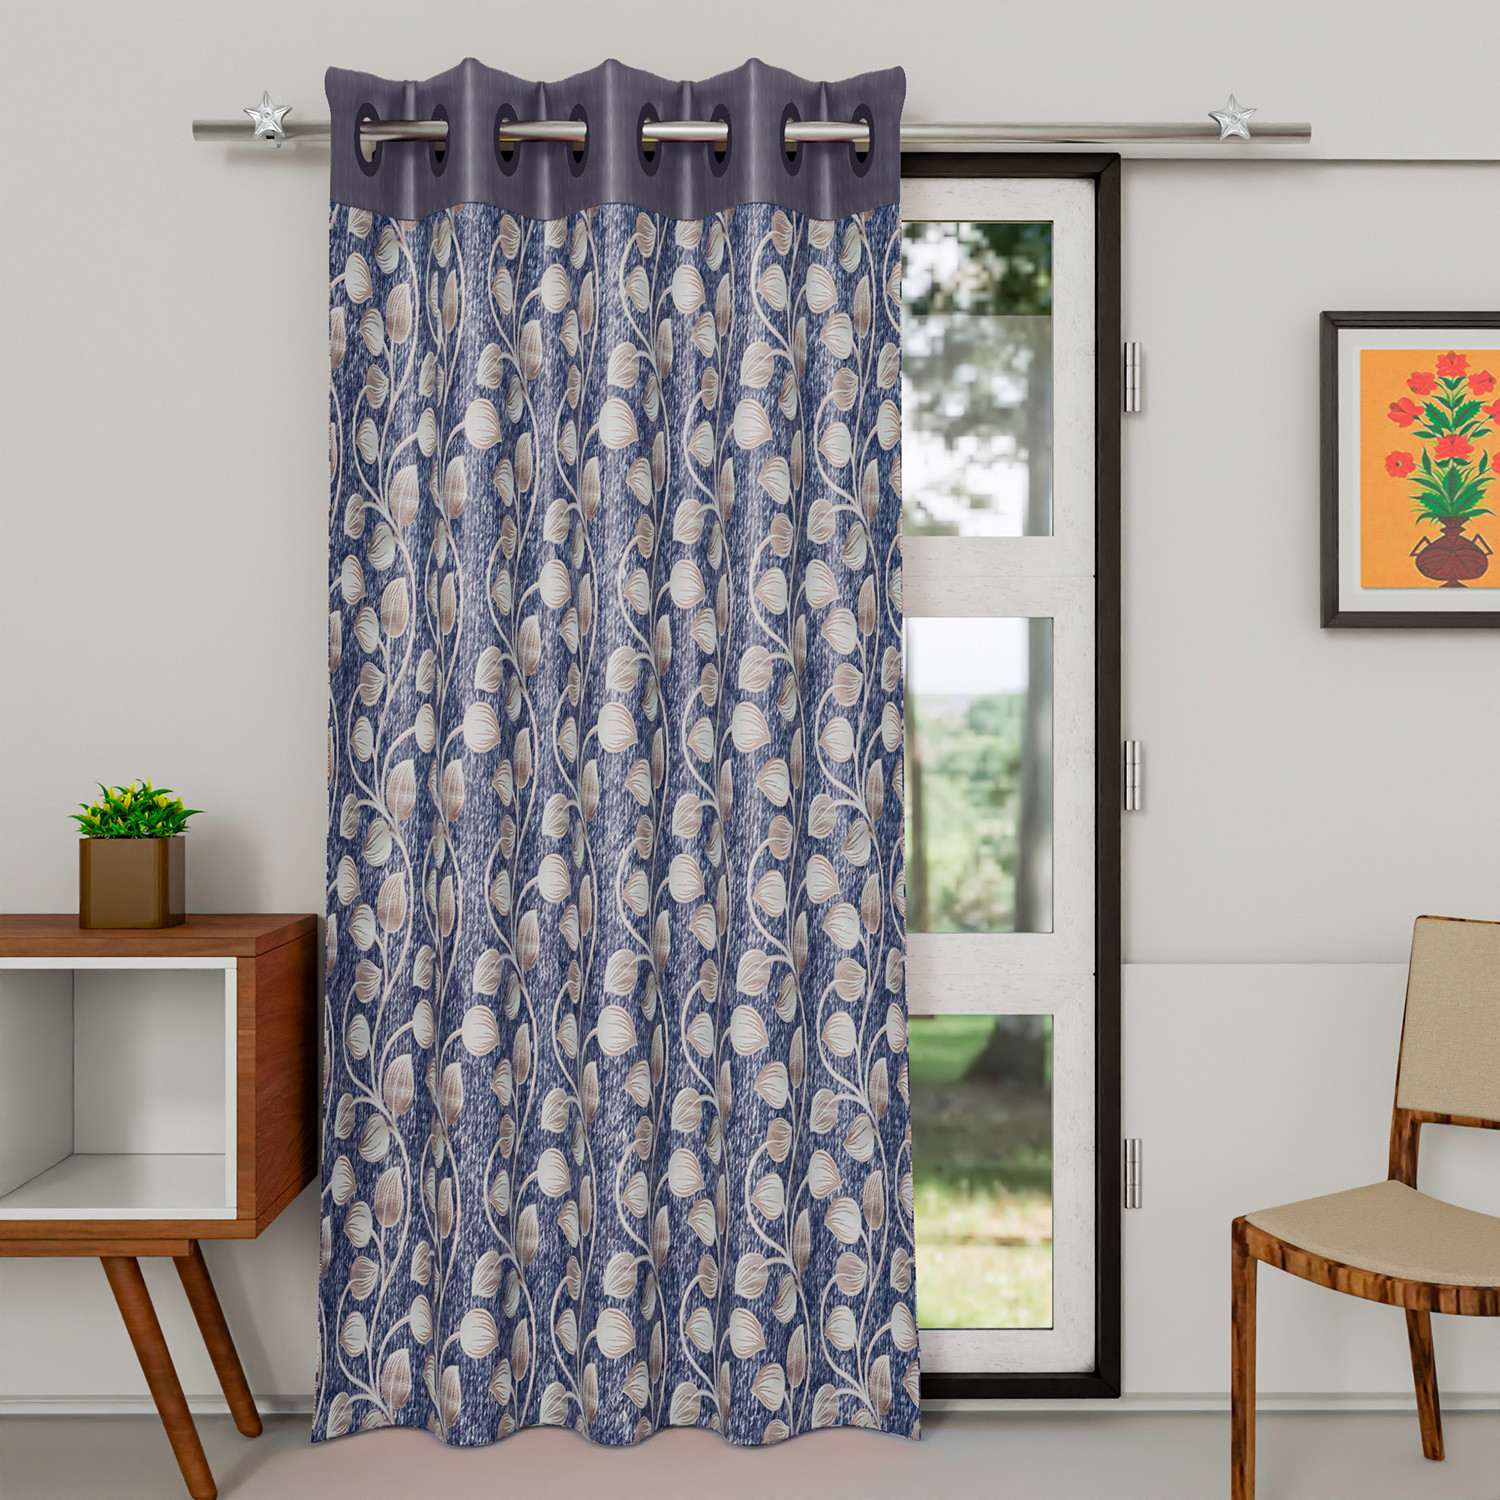 Kuber Industries Silk Decorative 9 Feet Long Door Curtain | Leaf Print Blackout Drapes Curtain With 8 Eyelet For Home & Office (Sky Blue)